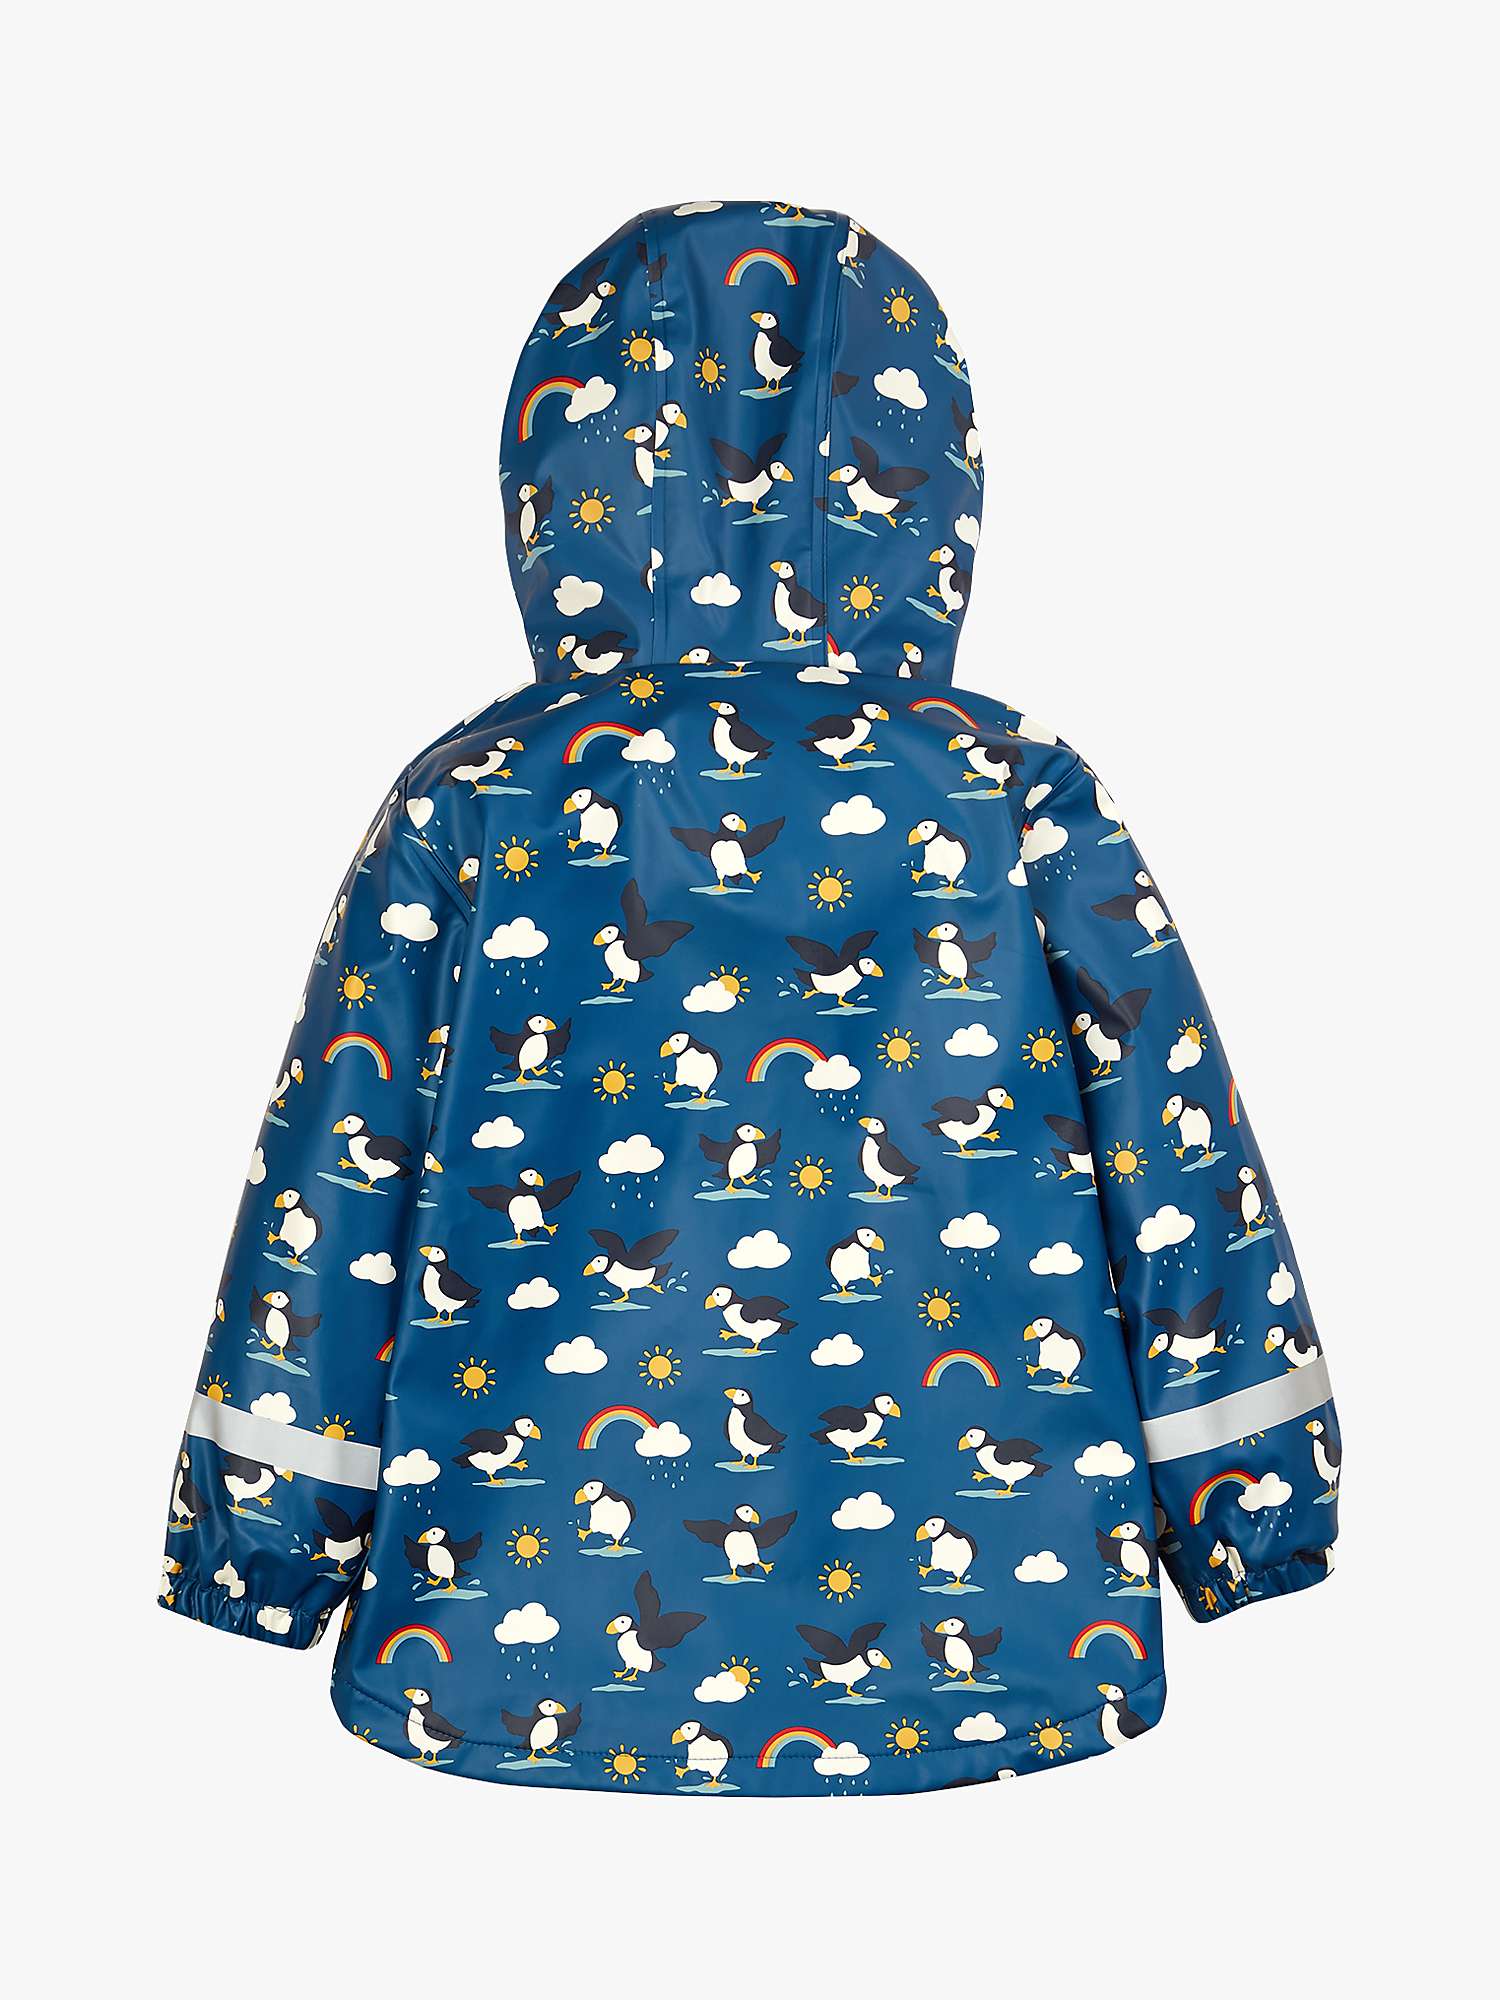 Buy Frugi Kids' Puddle Buster Puffin Puddles Waterproof Coat, Multi Online at johnlewis.com